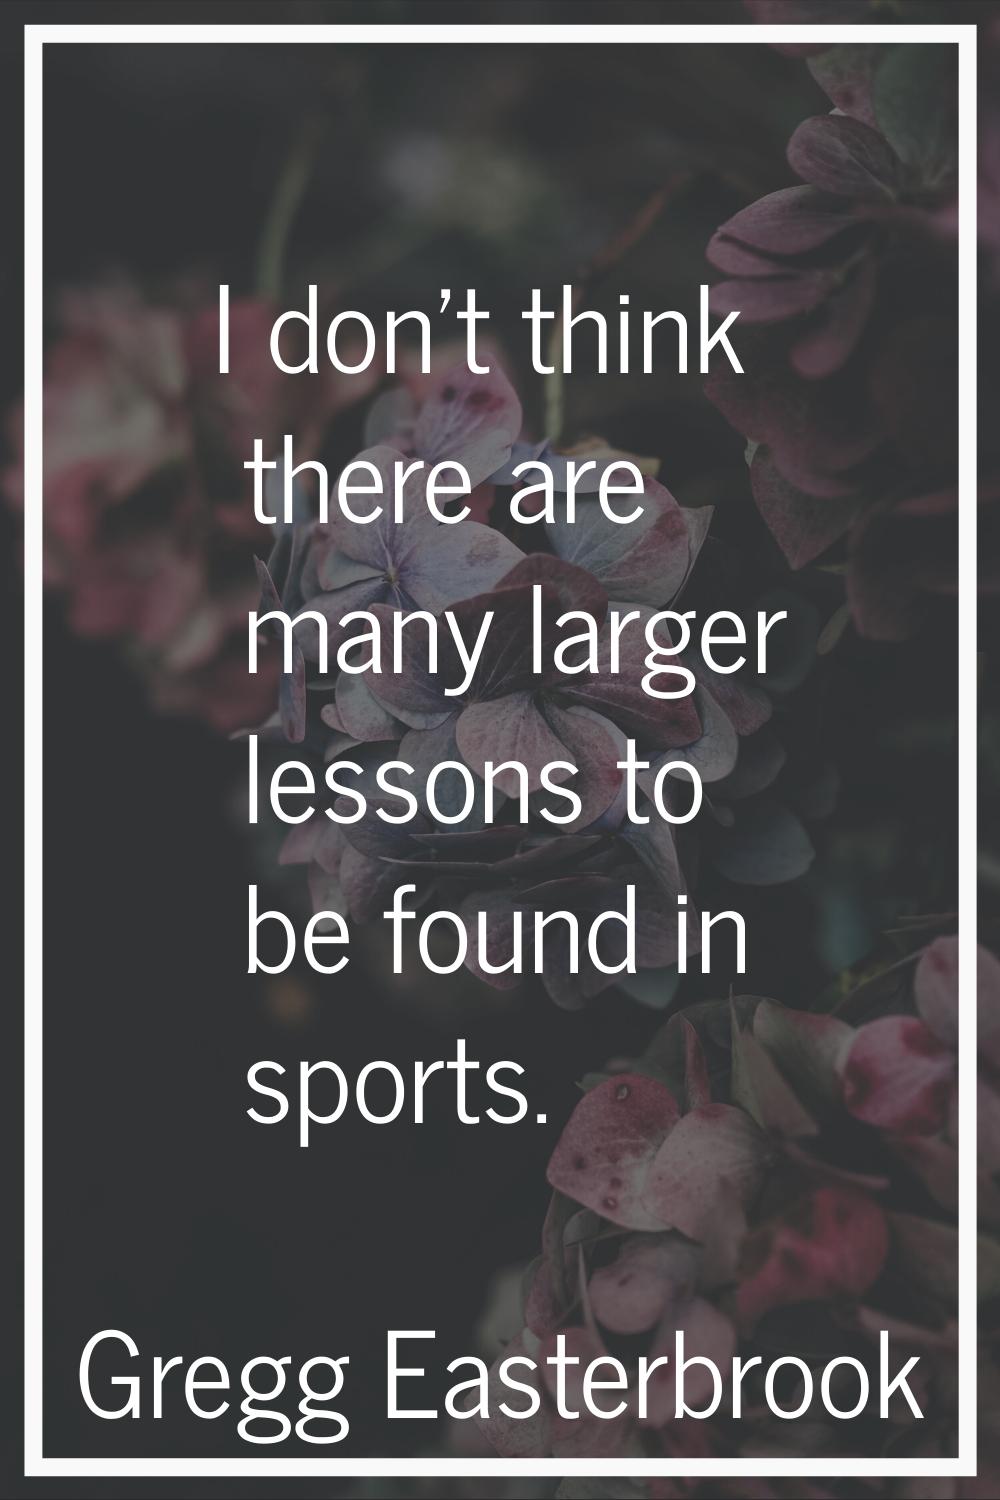 I don't think there are many larger lessons to be found in sports.